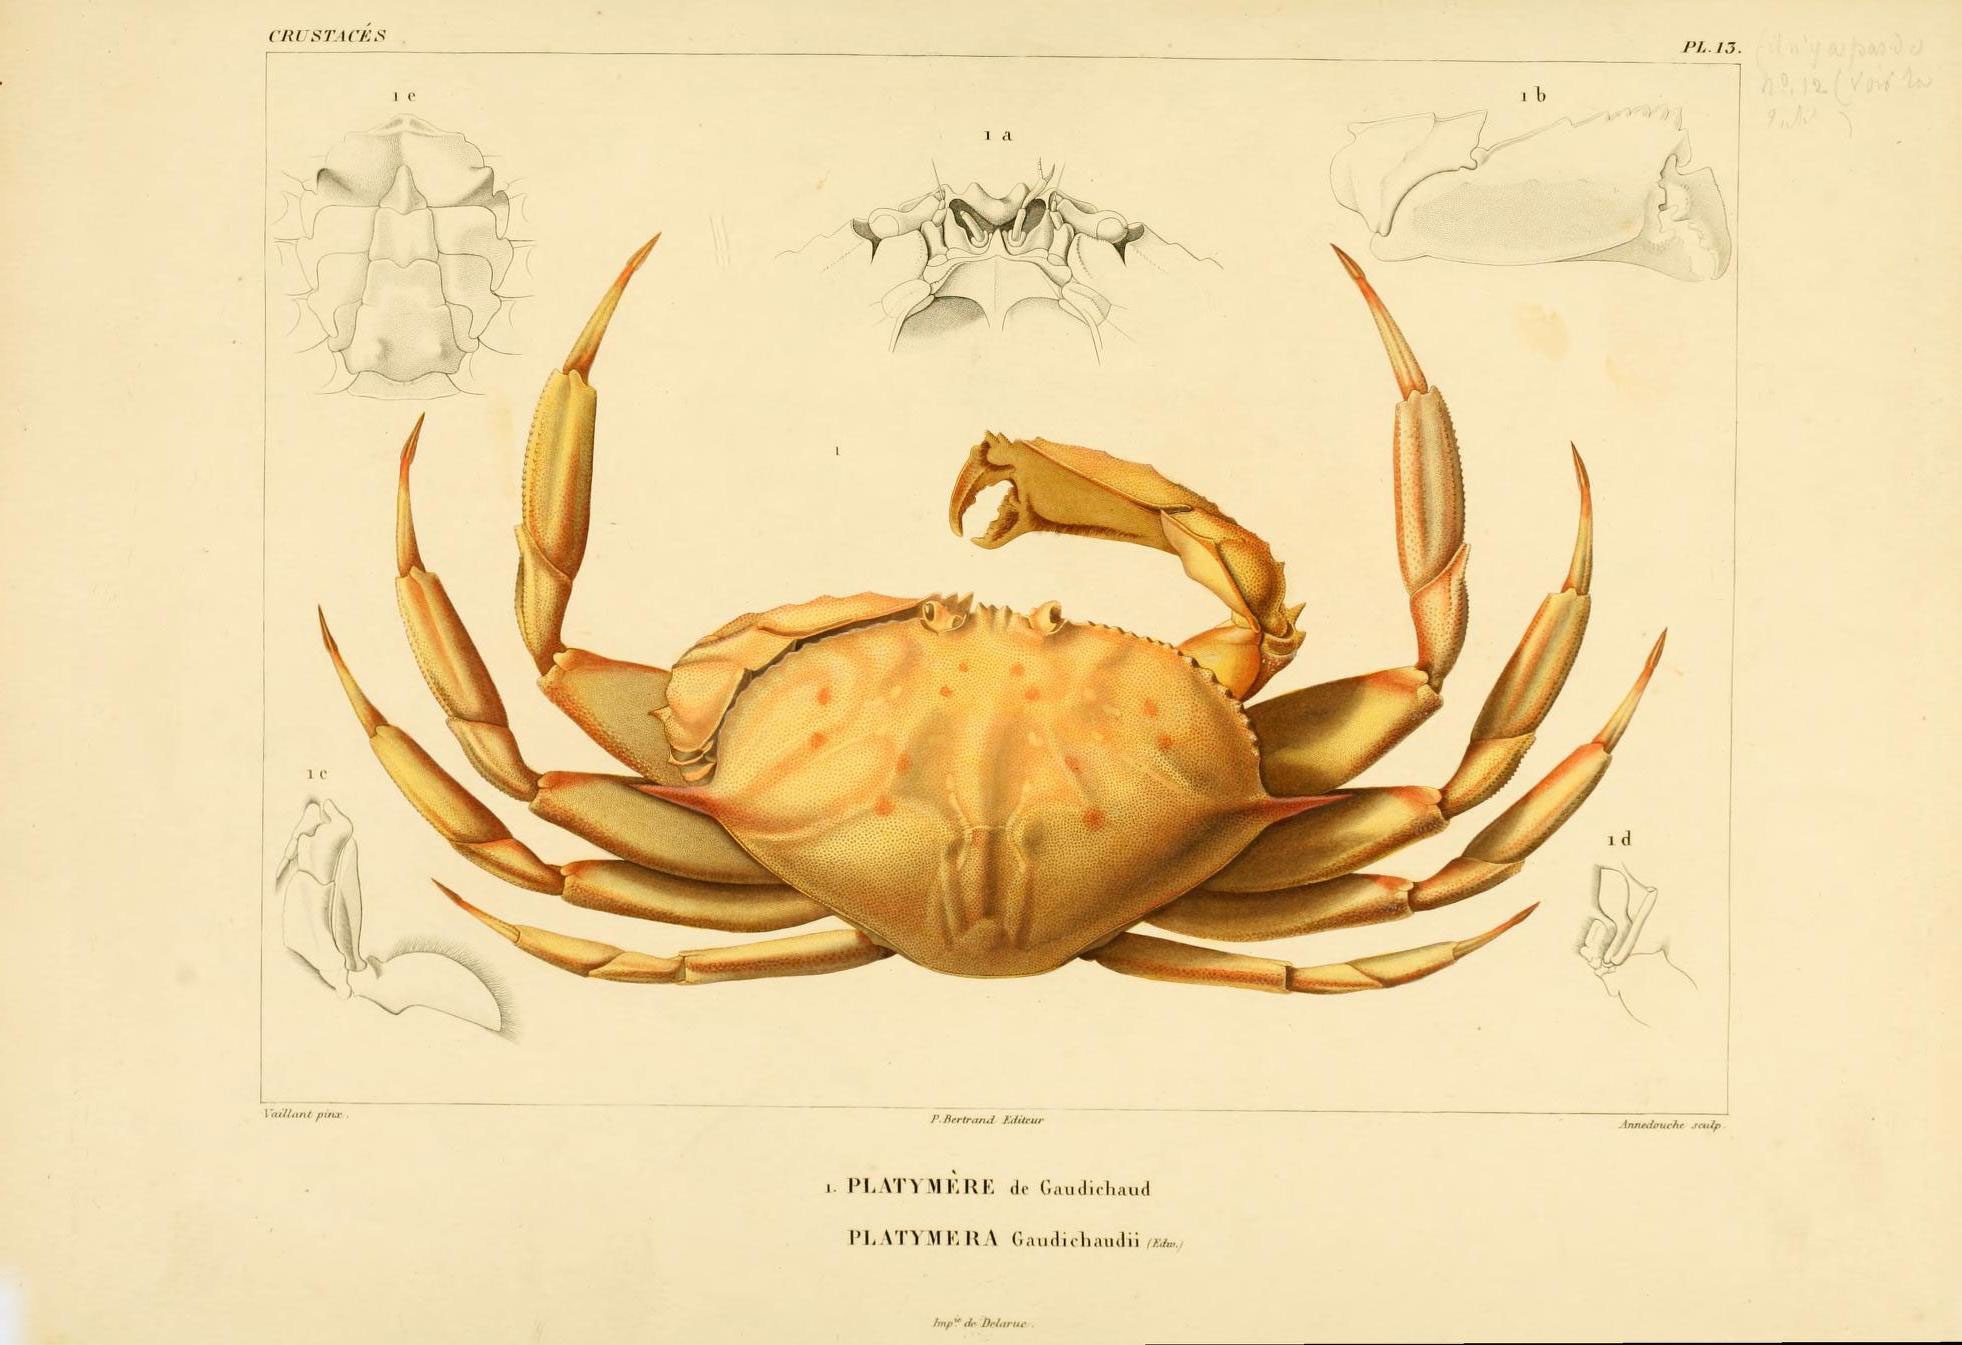 an antique print of a crab showing the size and features